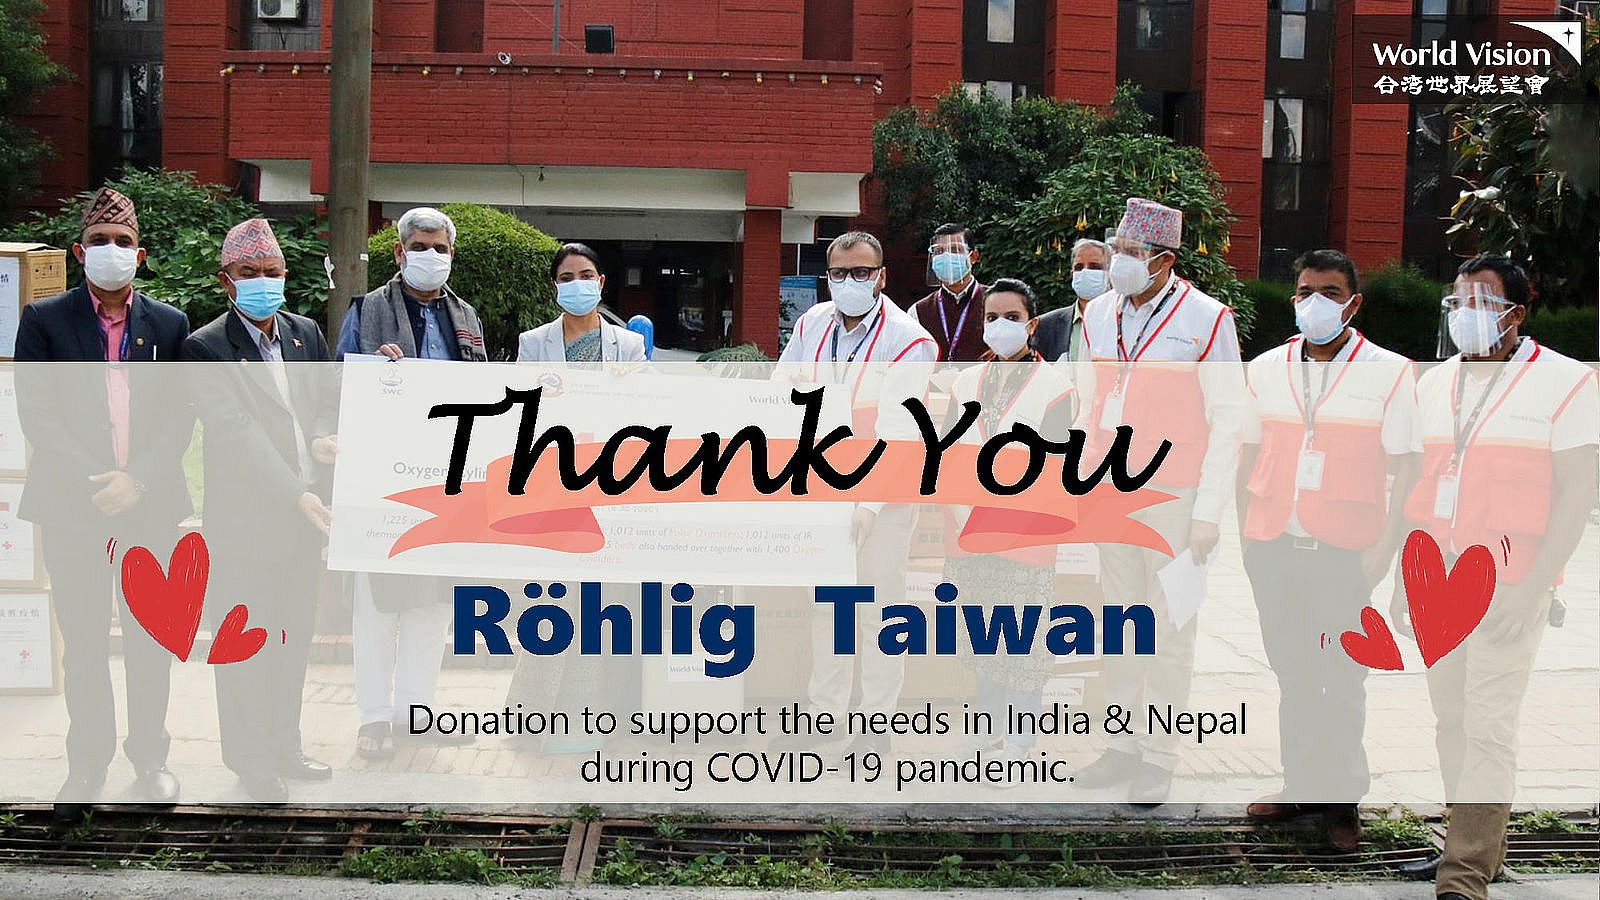 Thank you note from World Vision to Rohlig Taiwan showing health workers and pink hearts